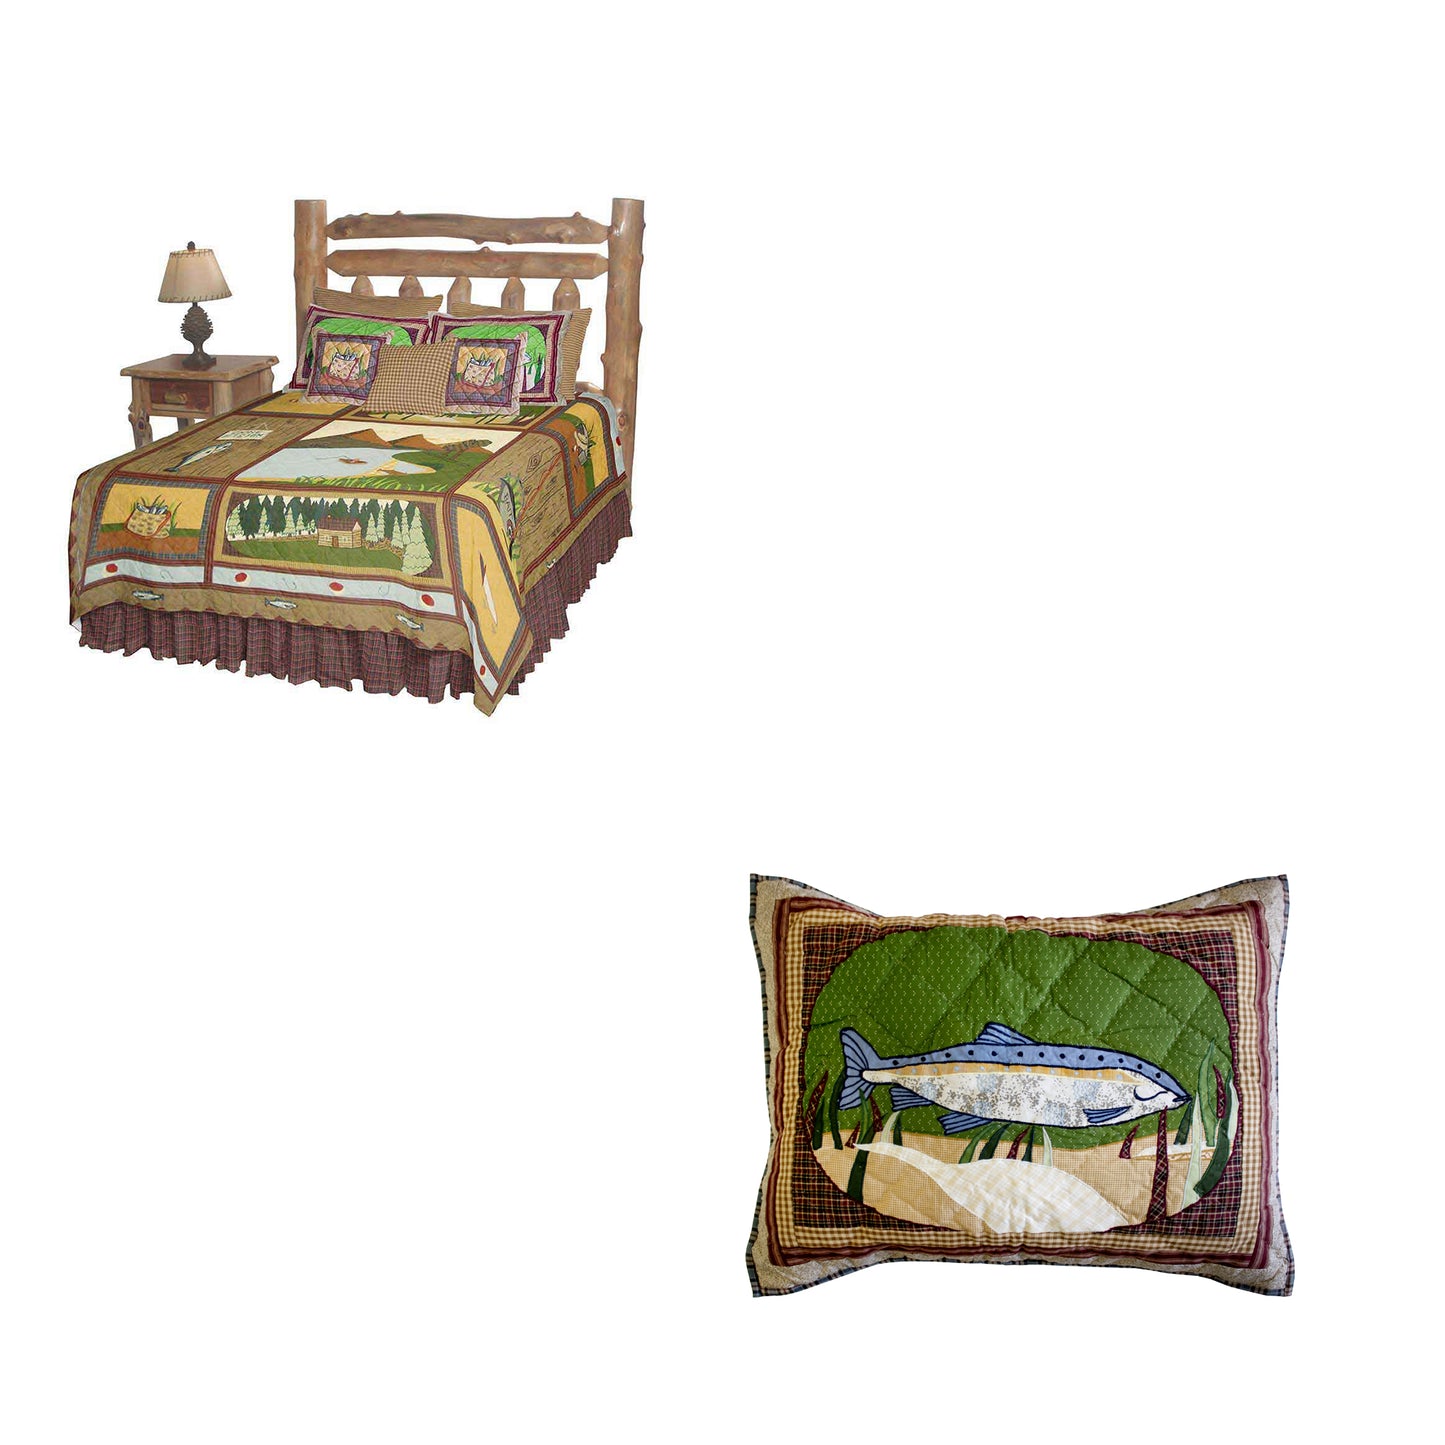 Fishing Break Bedding Accessories and Ensemble sets.